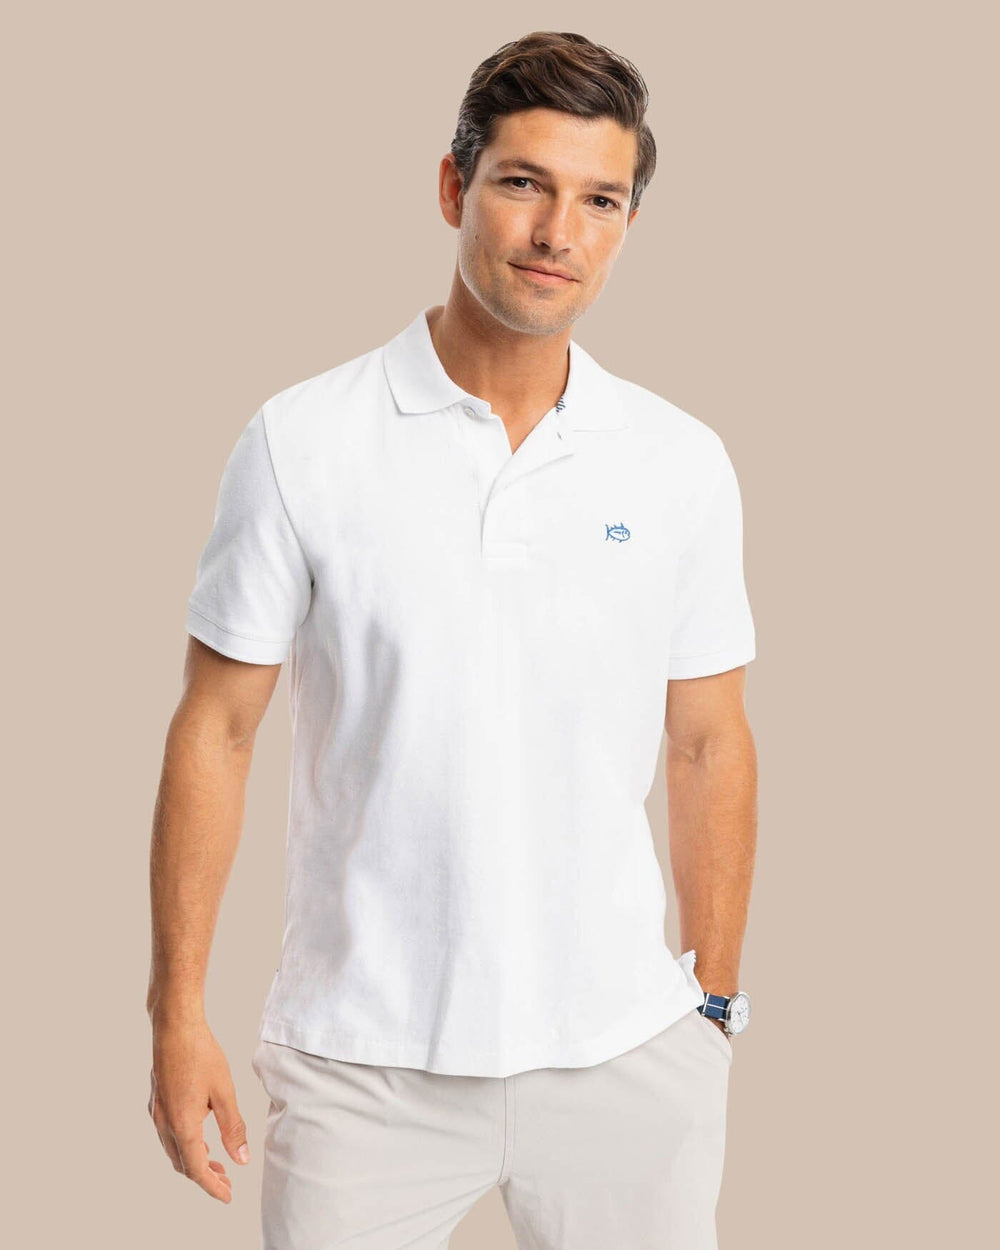 The model front view of the Men's New Skipjack Polo Shirt by Southern Tide - Classic White